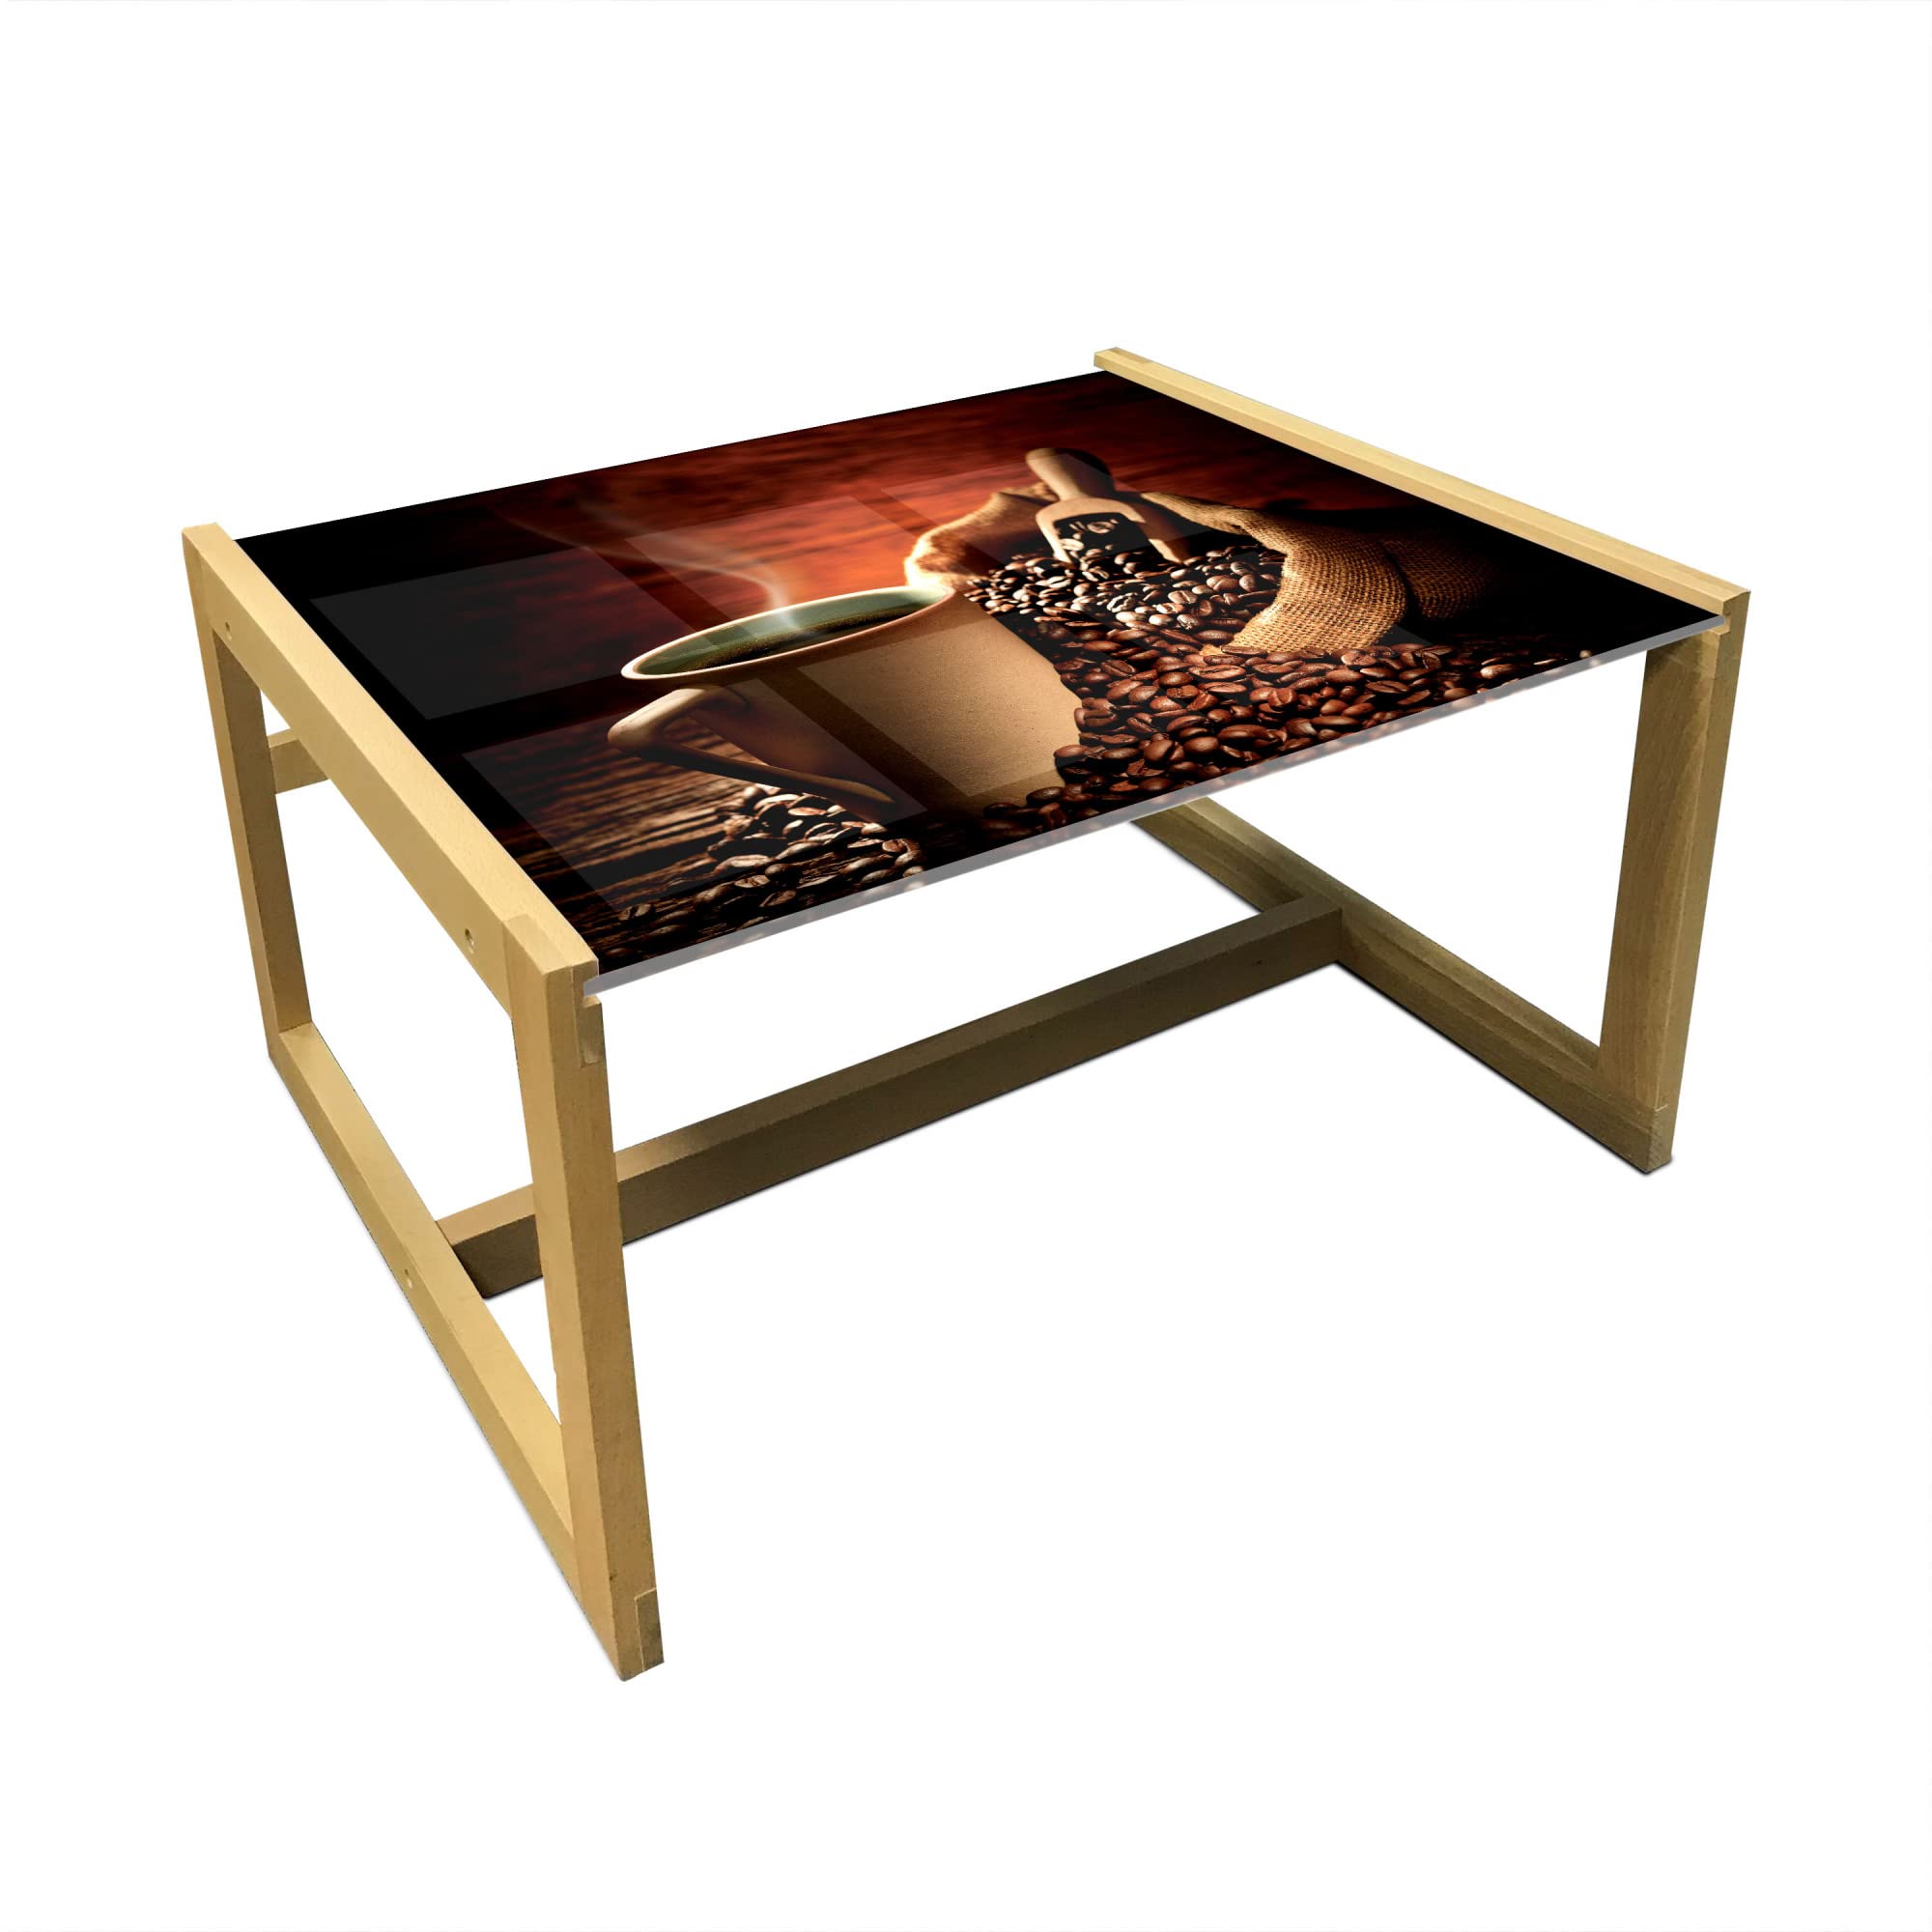 Amazon.com: Ambesonne Food Coffee Table, Hot Coffee in a Nude ...